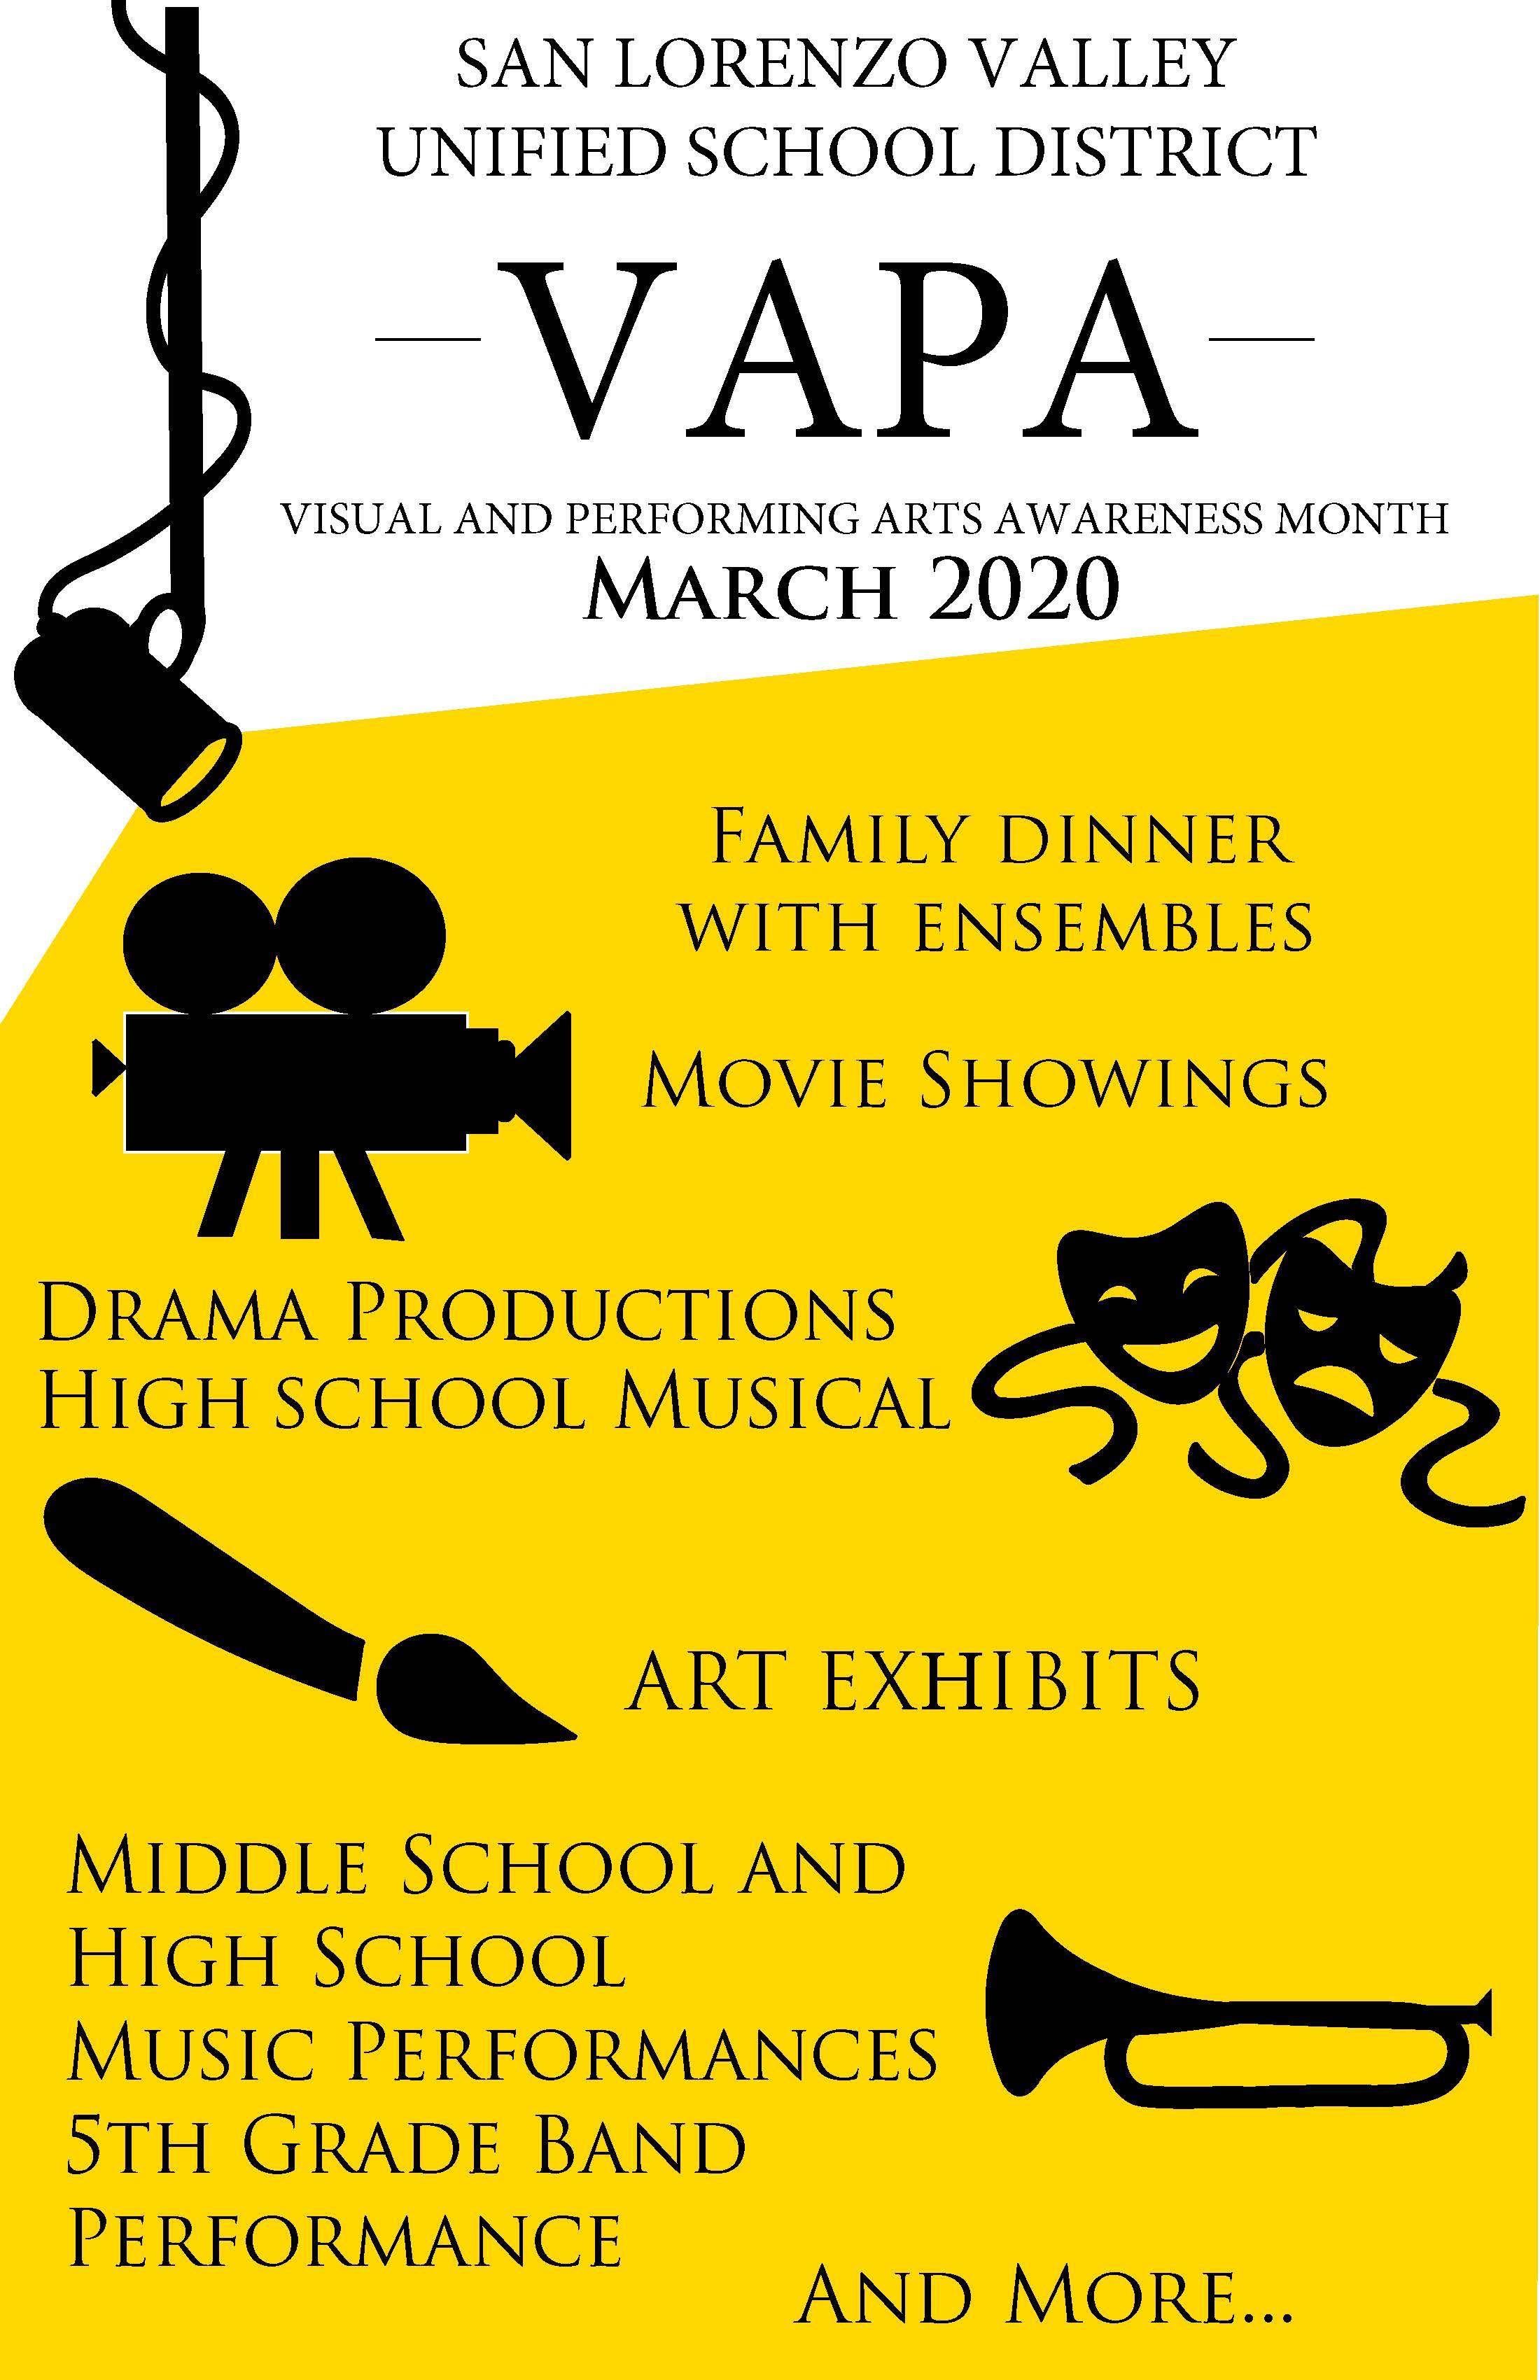 slvusd VAPA awareness month march 2020; family dinners with ensembles, movie showings, drama productions, art exhibits, music performances and more...